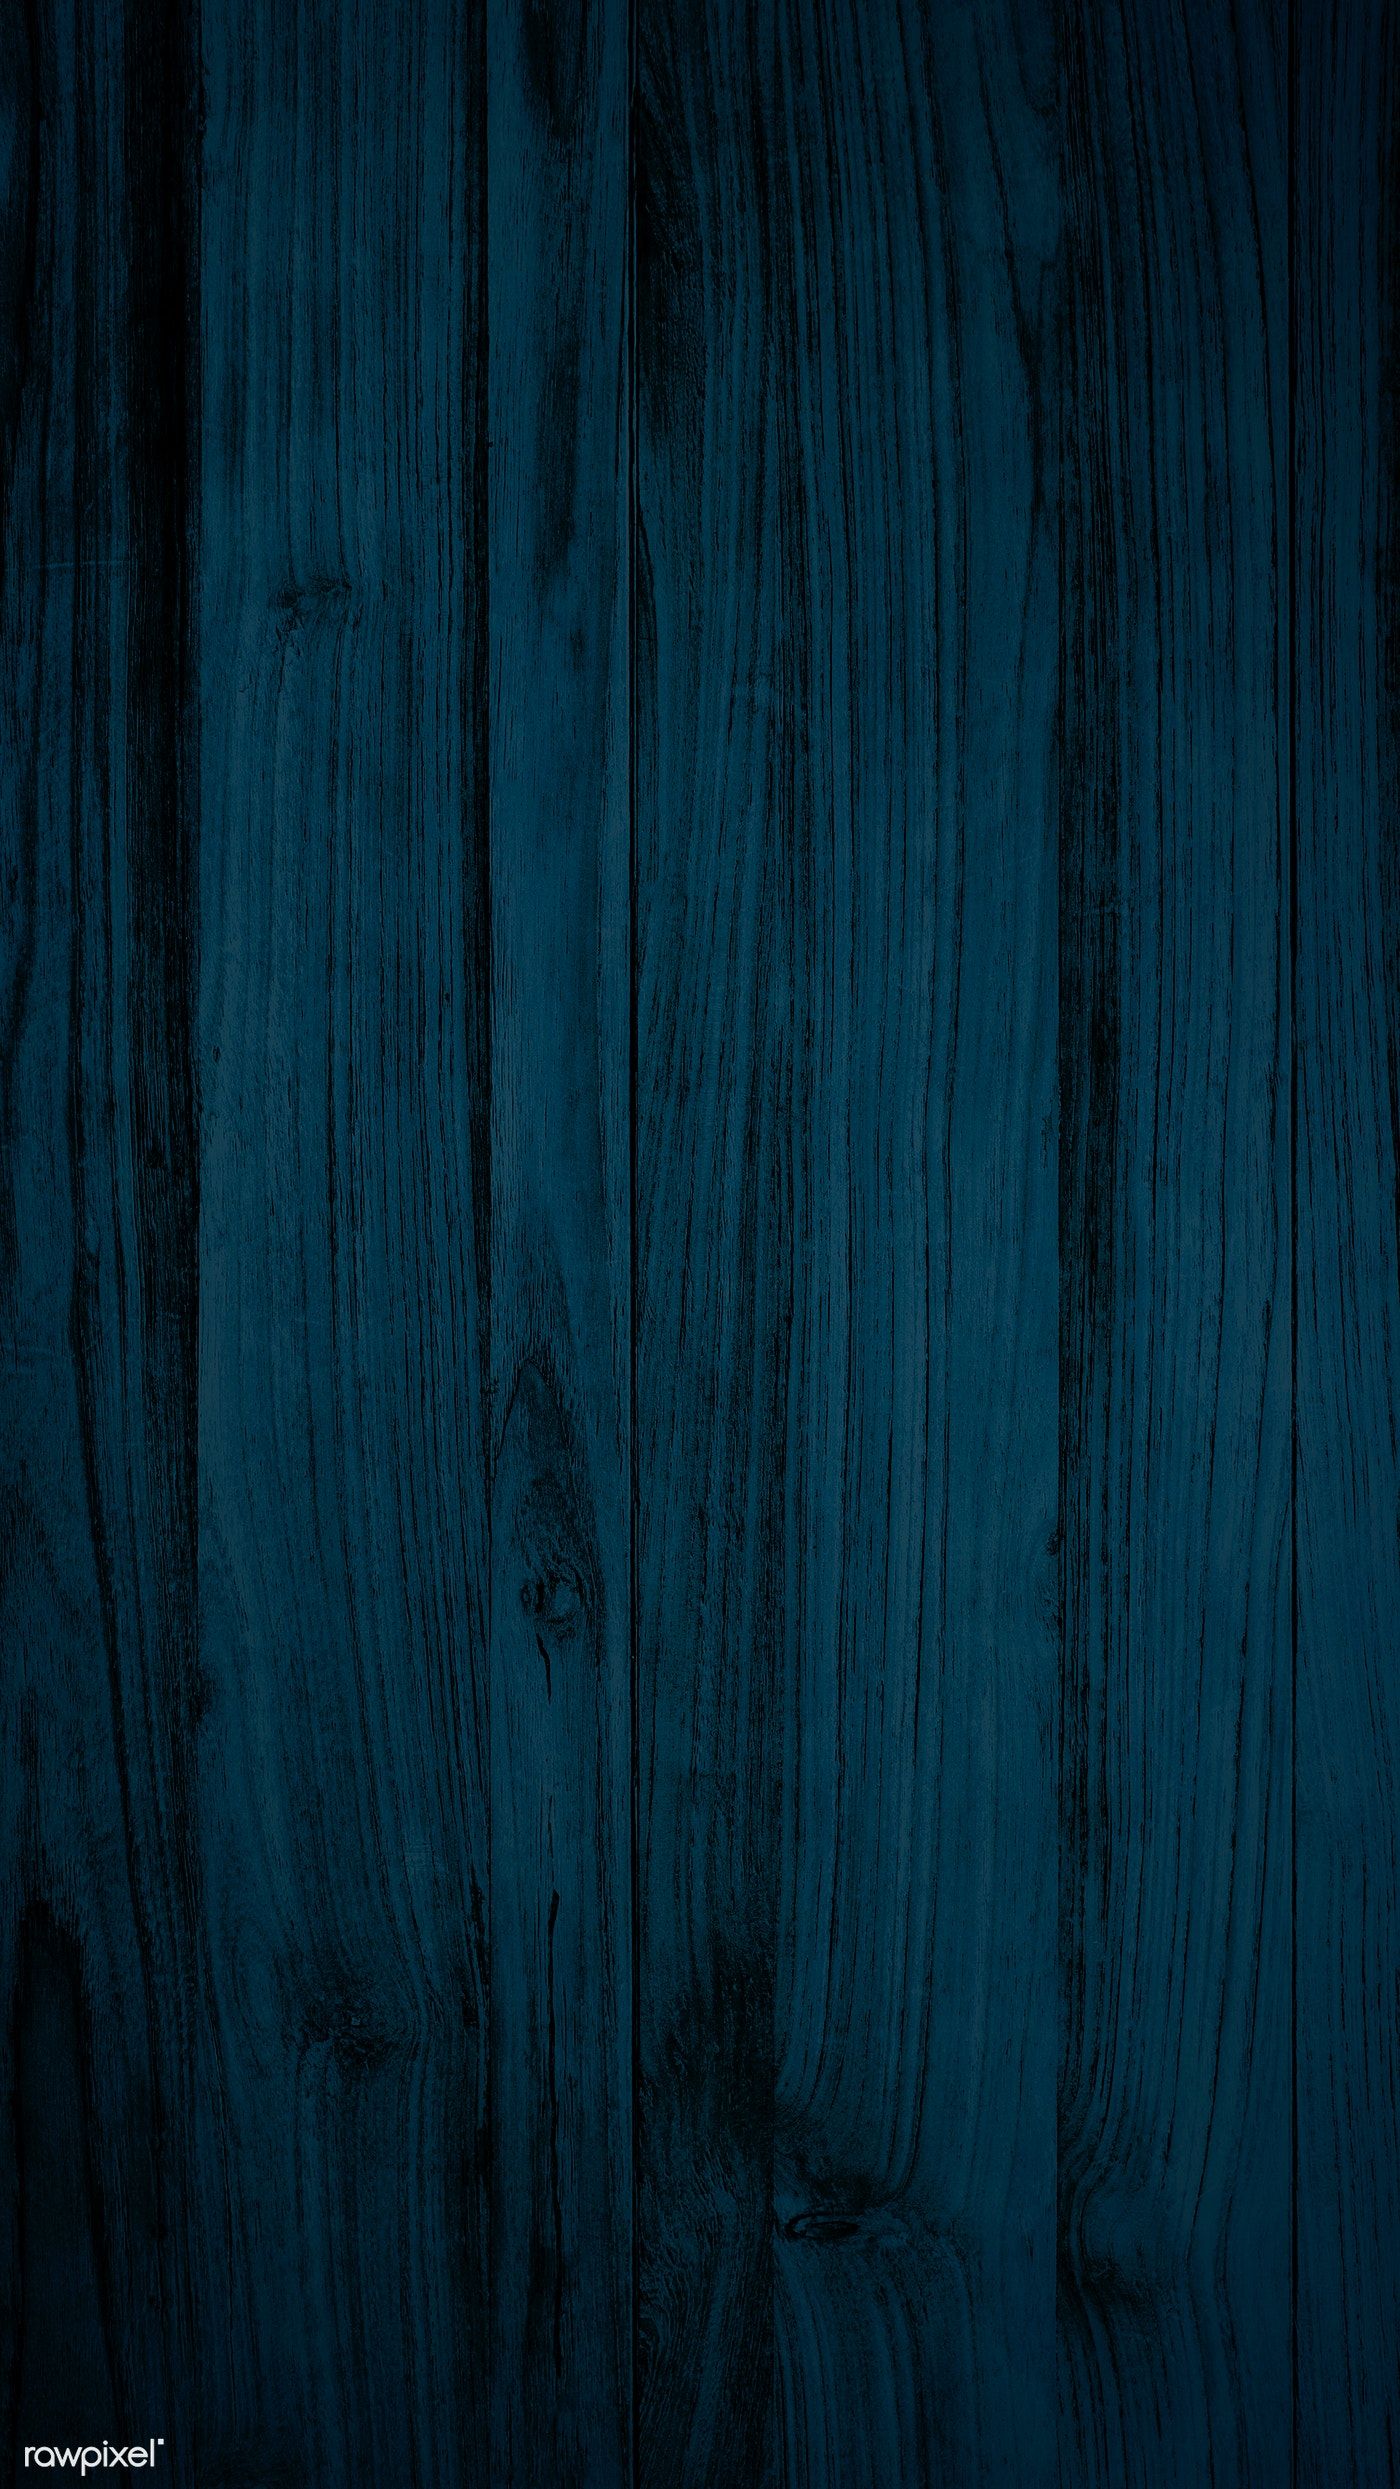 Blue wood textured mobile wallpaper background free image by